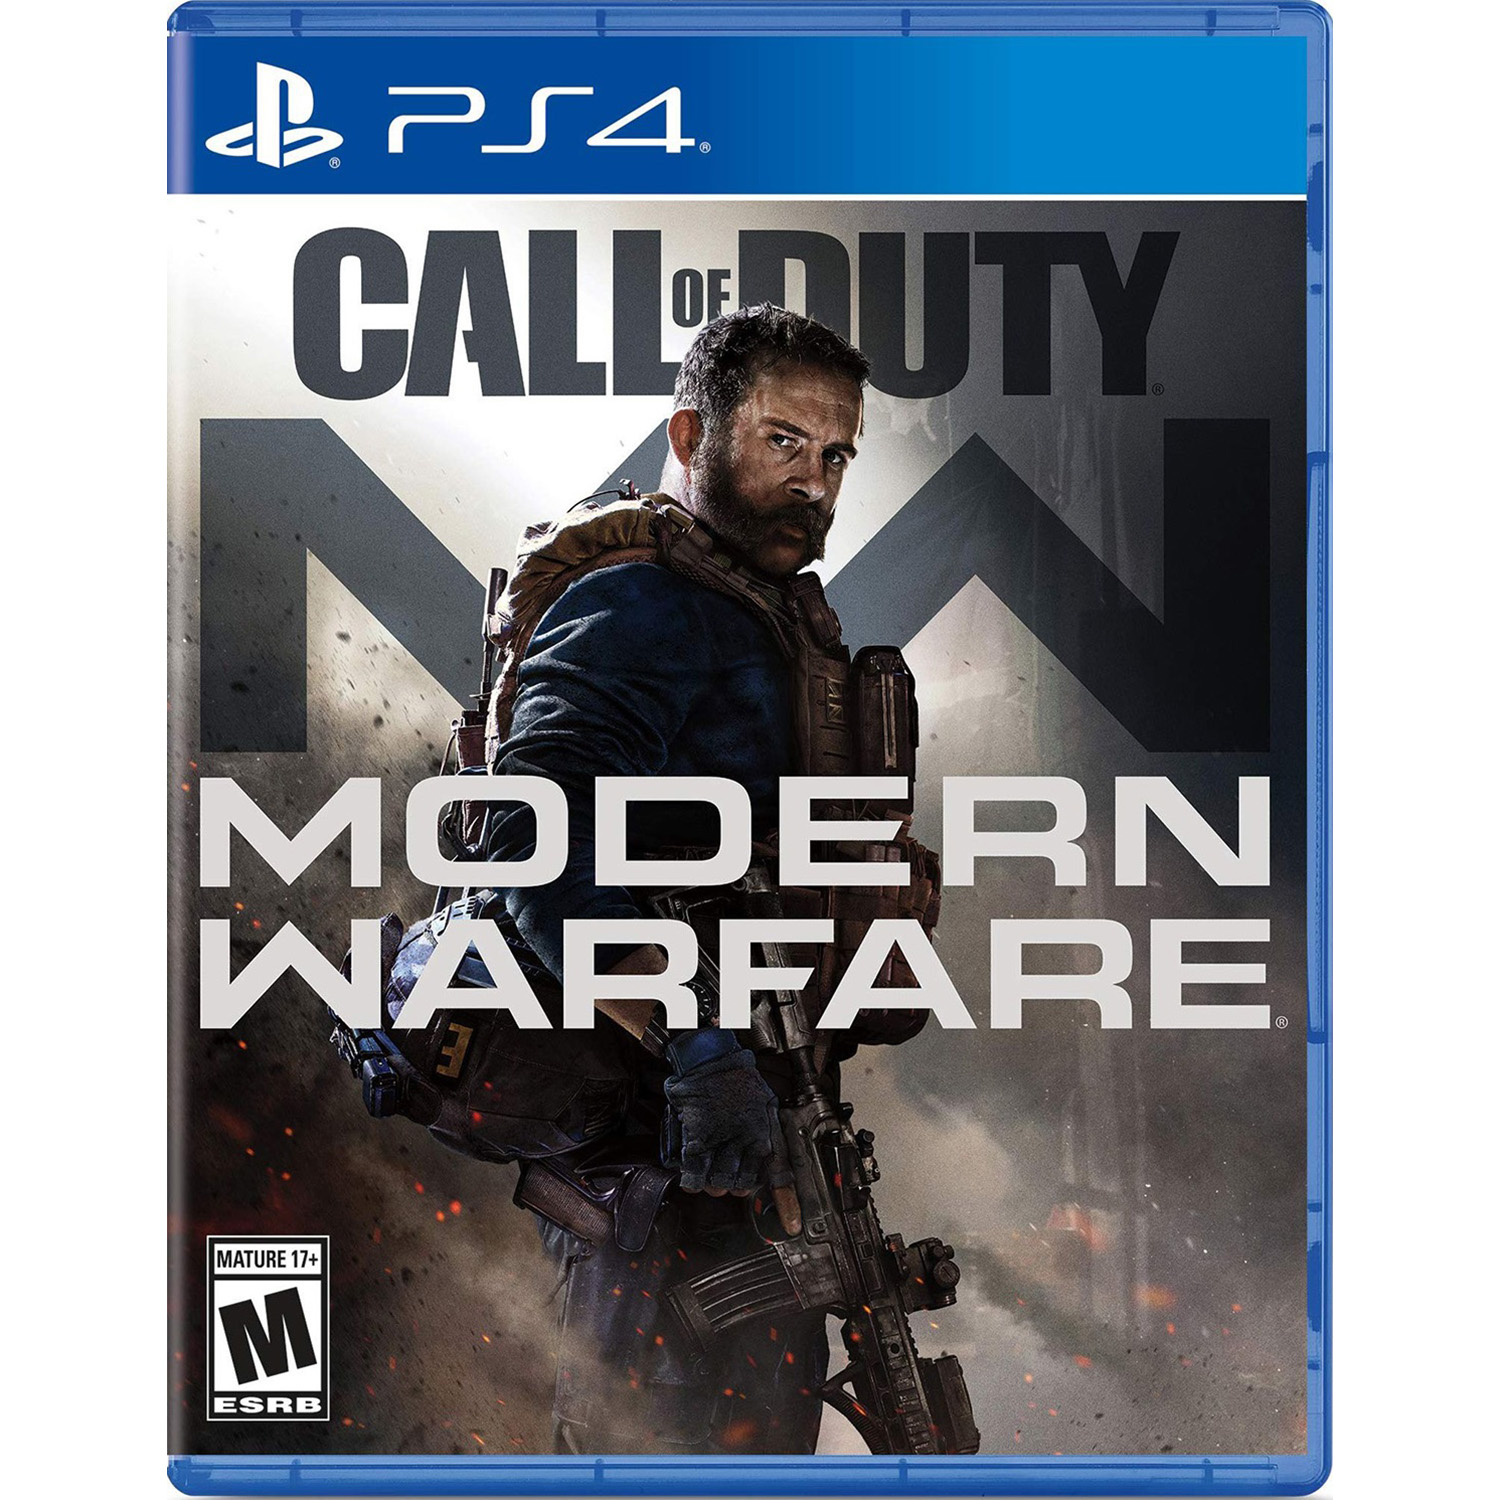 Call of Duty: Modern Warfare, Activision, PlayStation 4, [Physical], 047875884359 - image 1 of 4